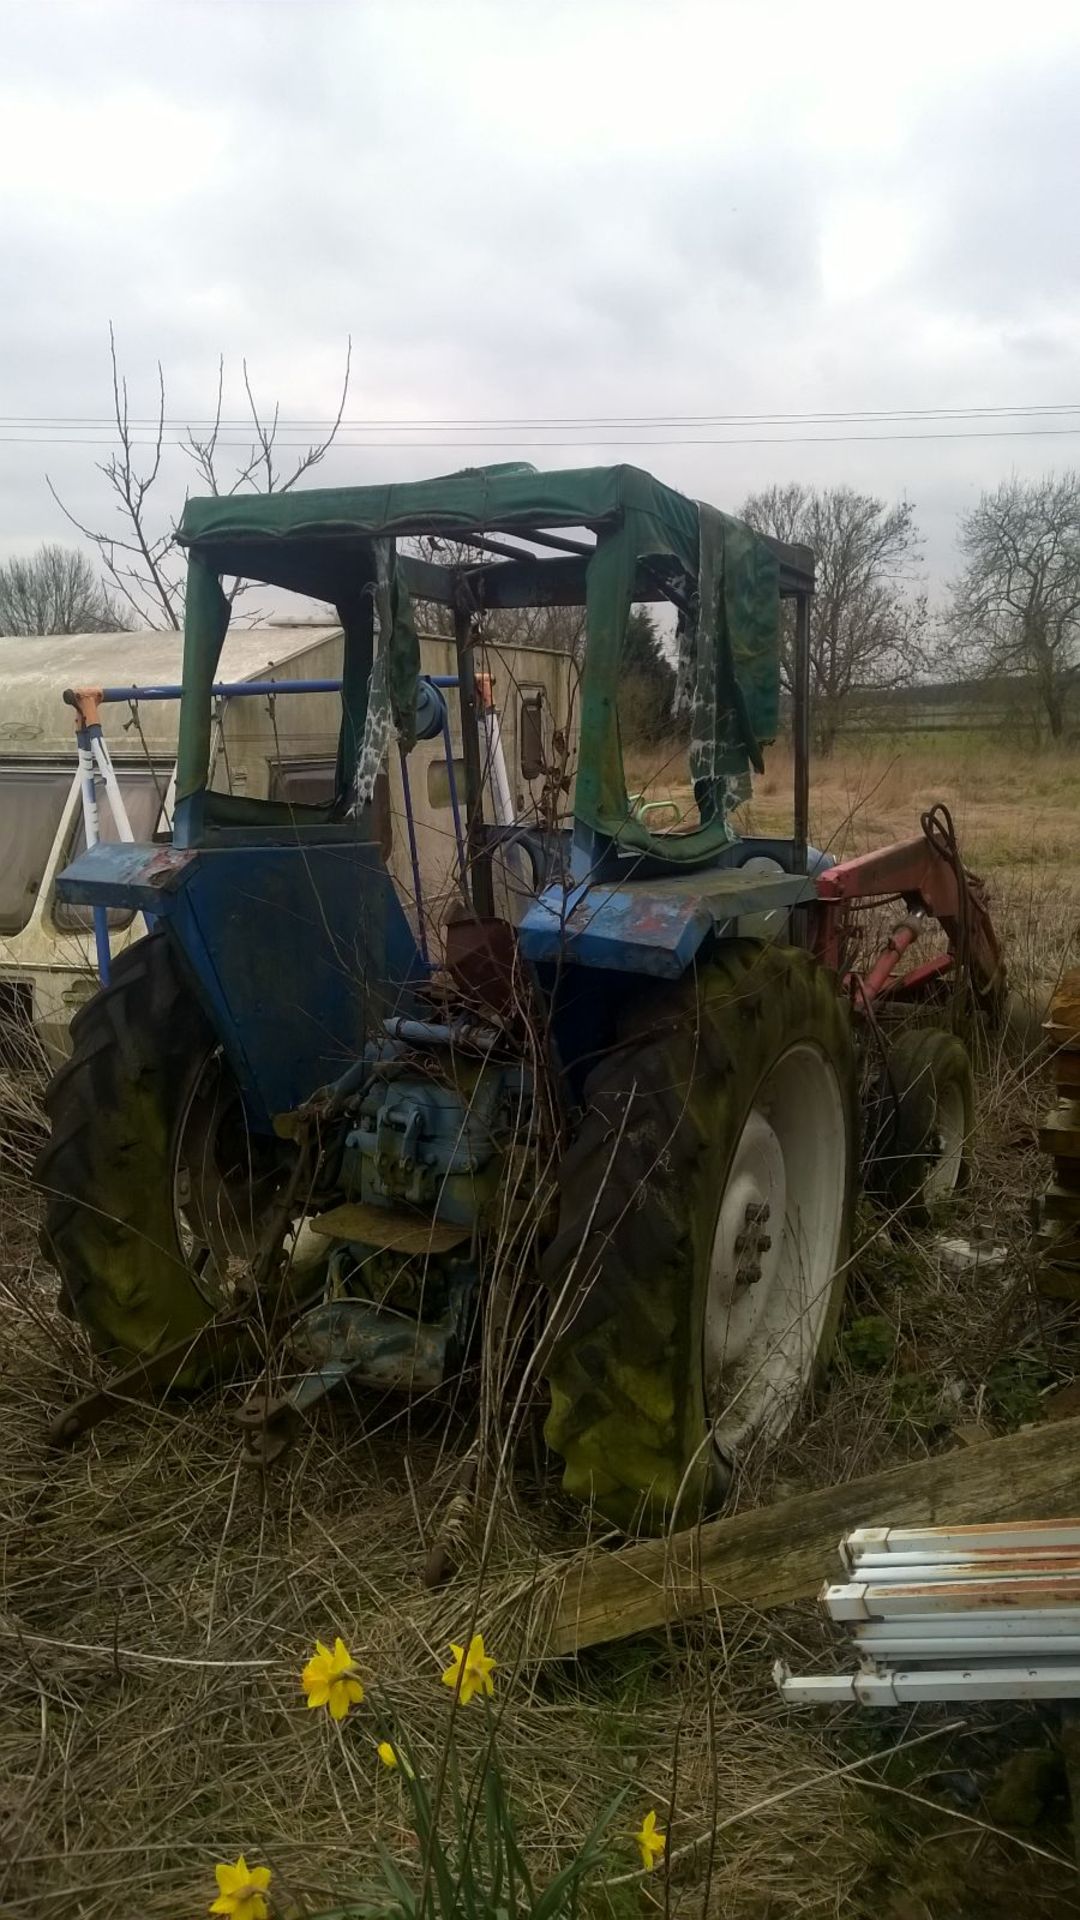 FORDSON  SUPER MAJOR c/w POWER LOADER   WE HAVENT HEARD IT RUNNING YET BUT WE ARE INTENDING TO GET